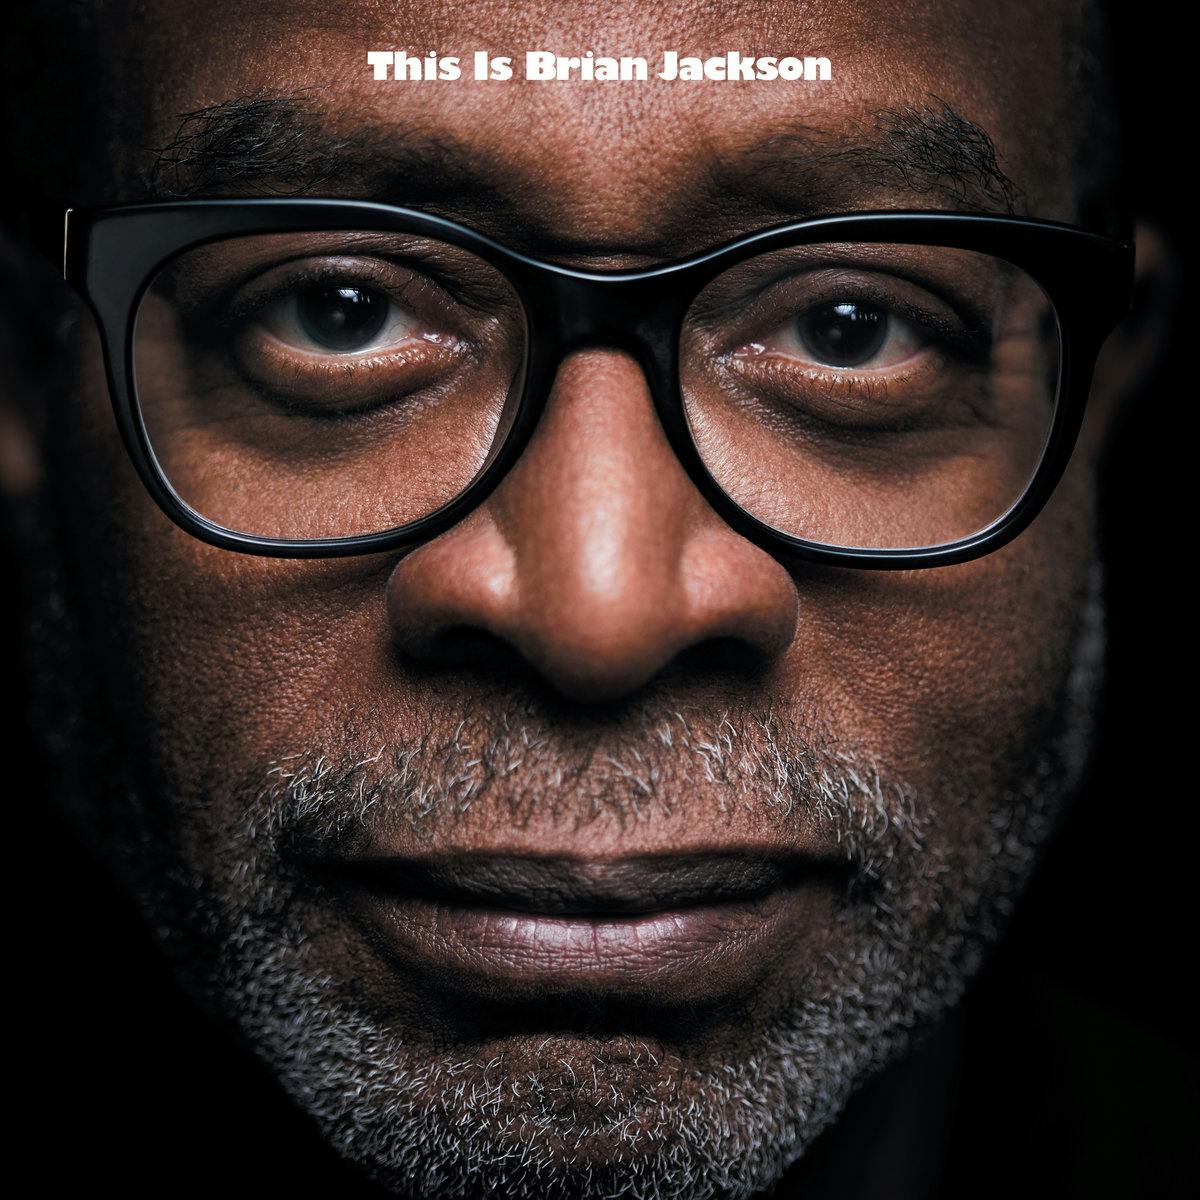 Legendary American musician Brian Jackson announces his first solo album in over 20 years, ‘This Is Brian Jackson’, produced by Phenomenal Handclap Band founder Daniel Collás and released on BBE Music.